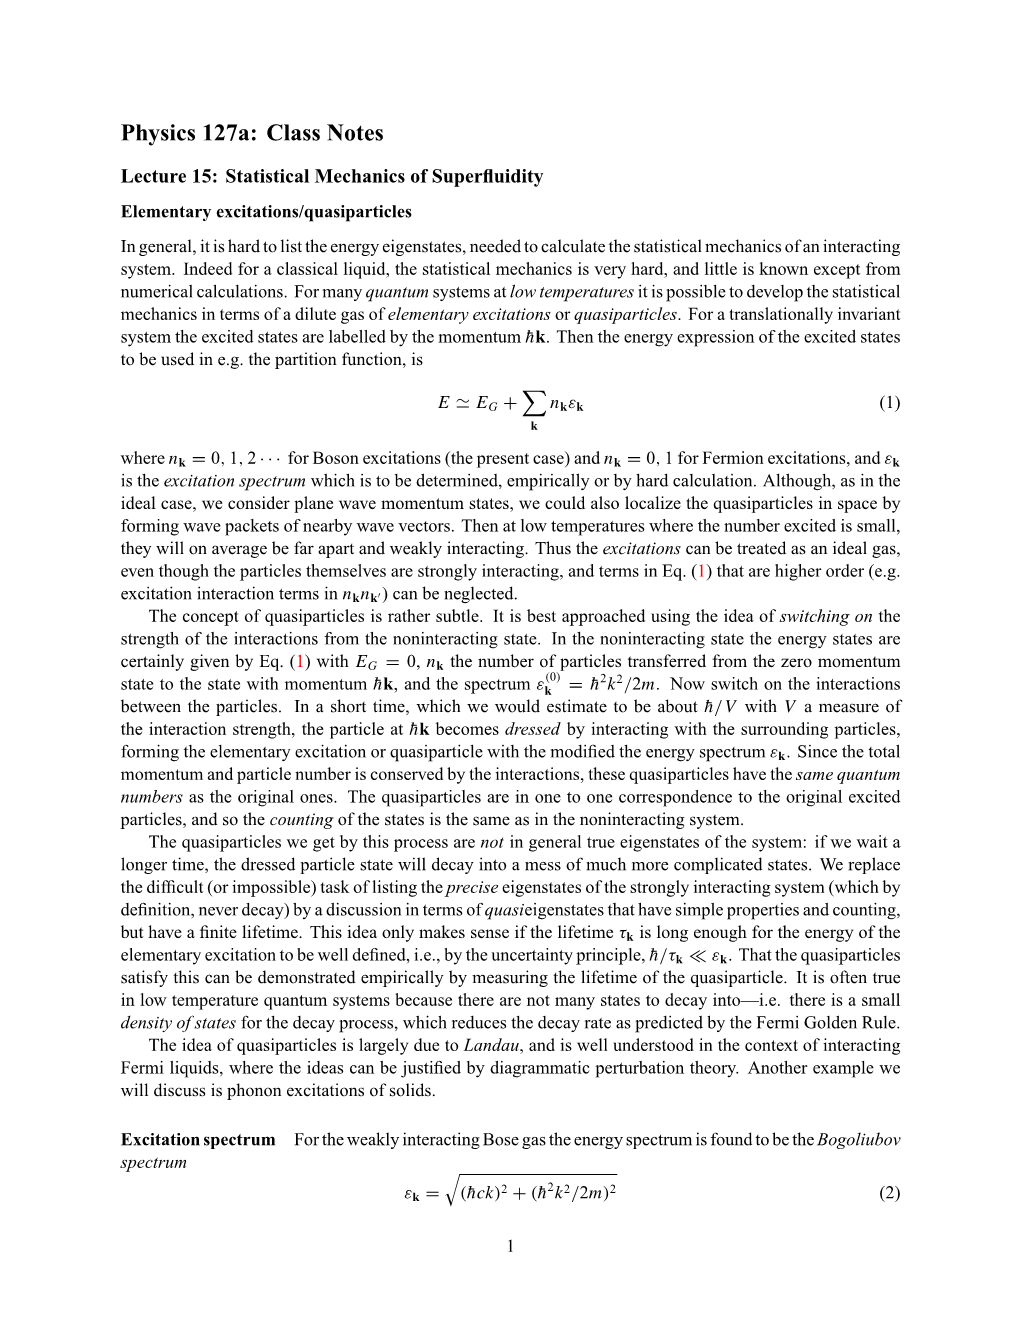 Lecture 15: Statistical Mechanics of Superfluidity